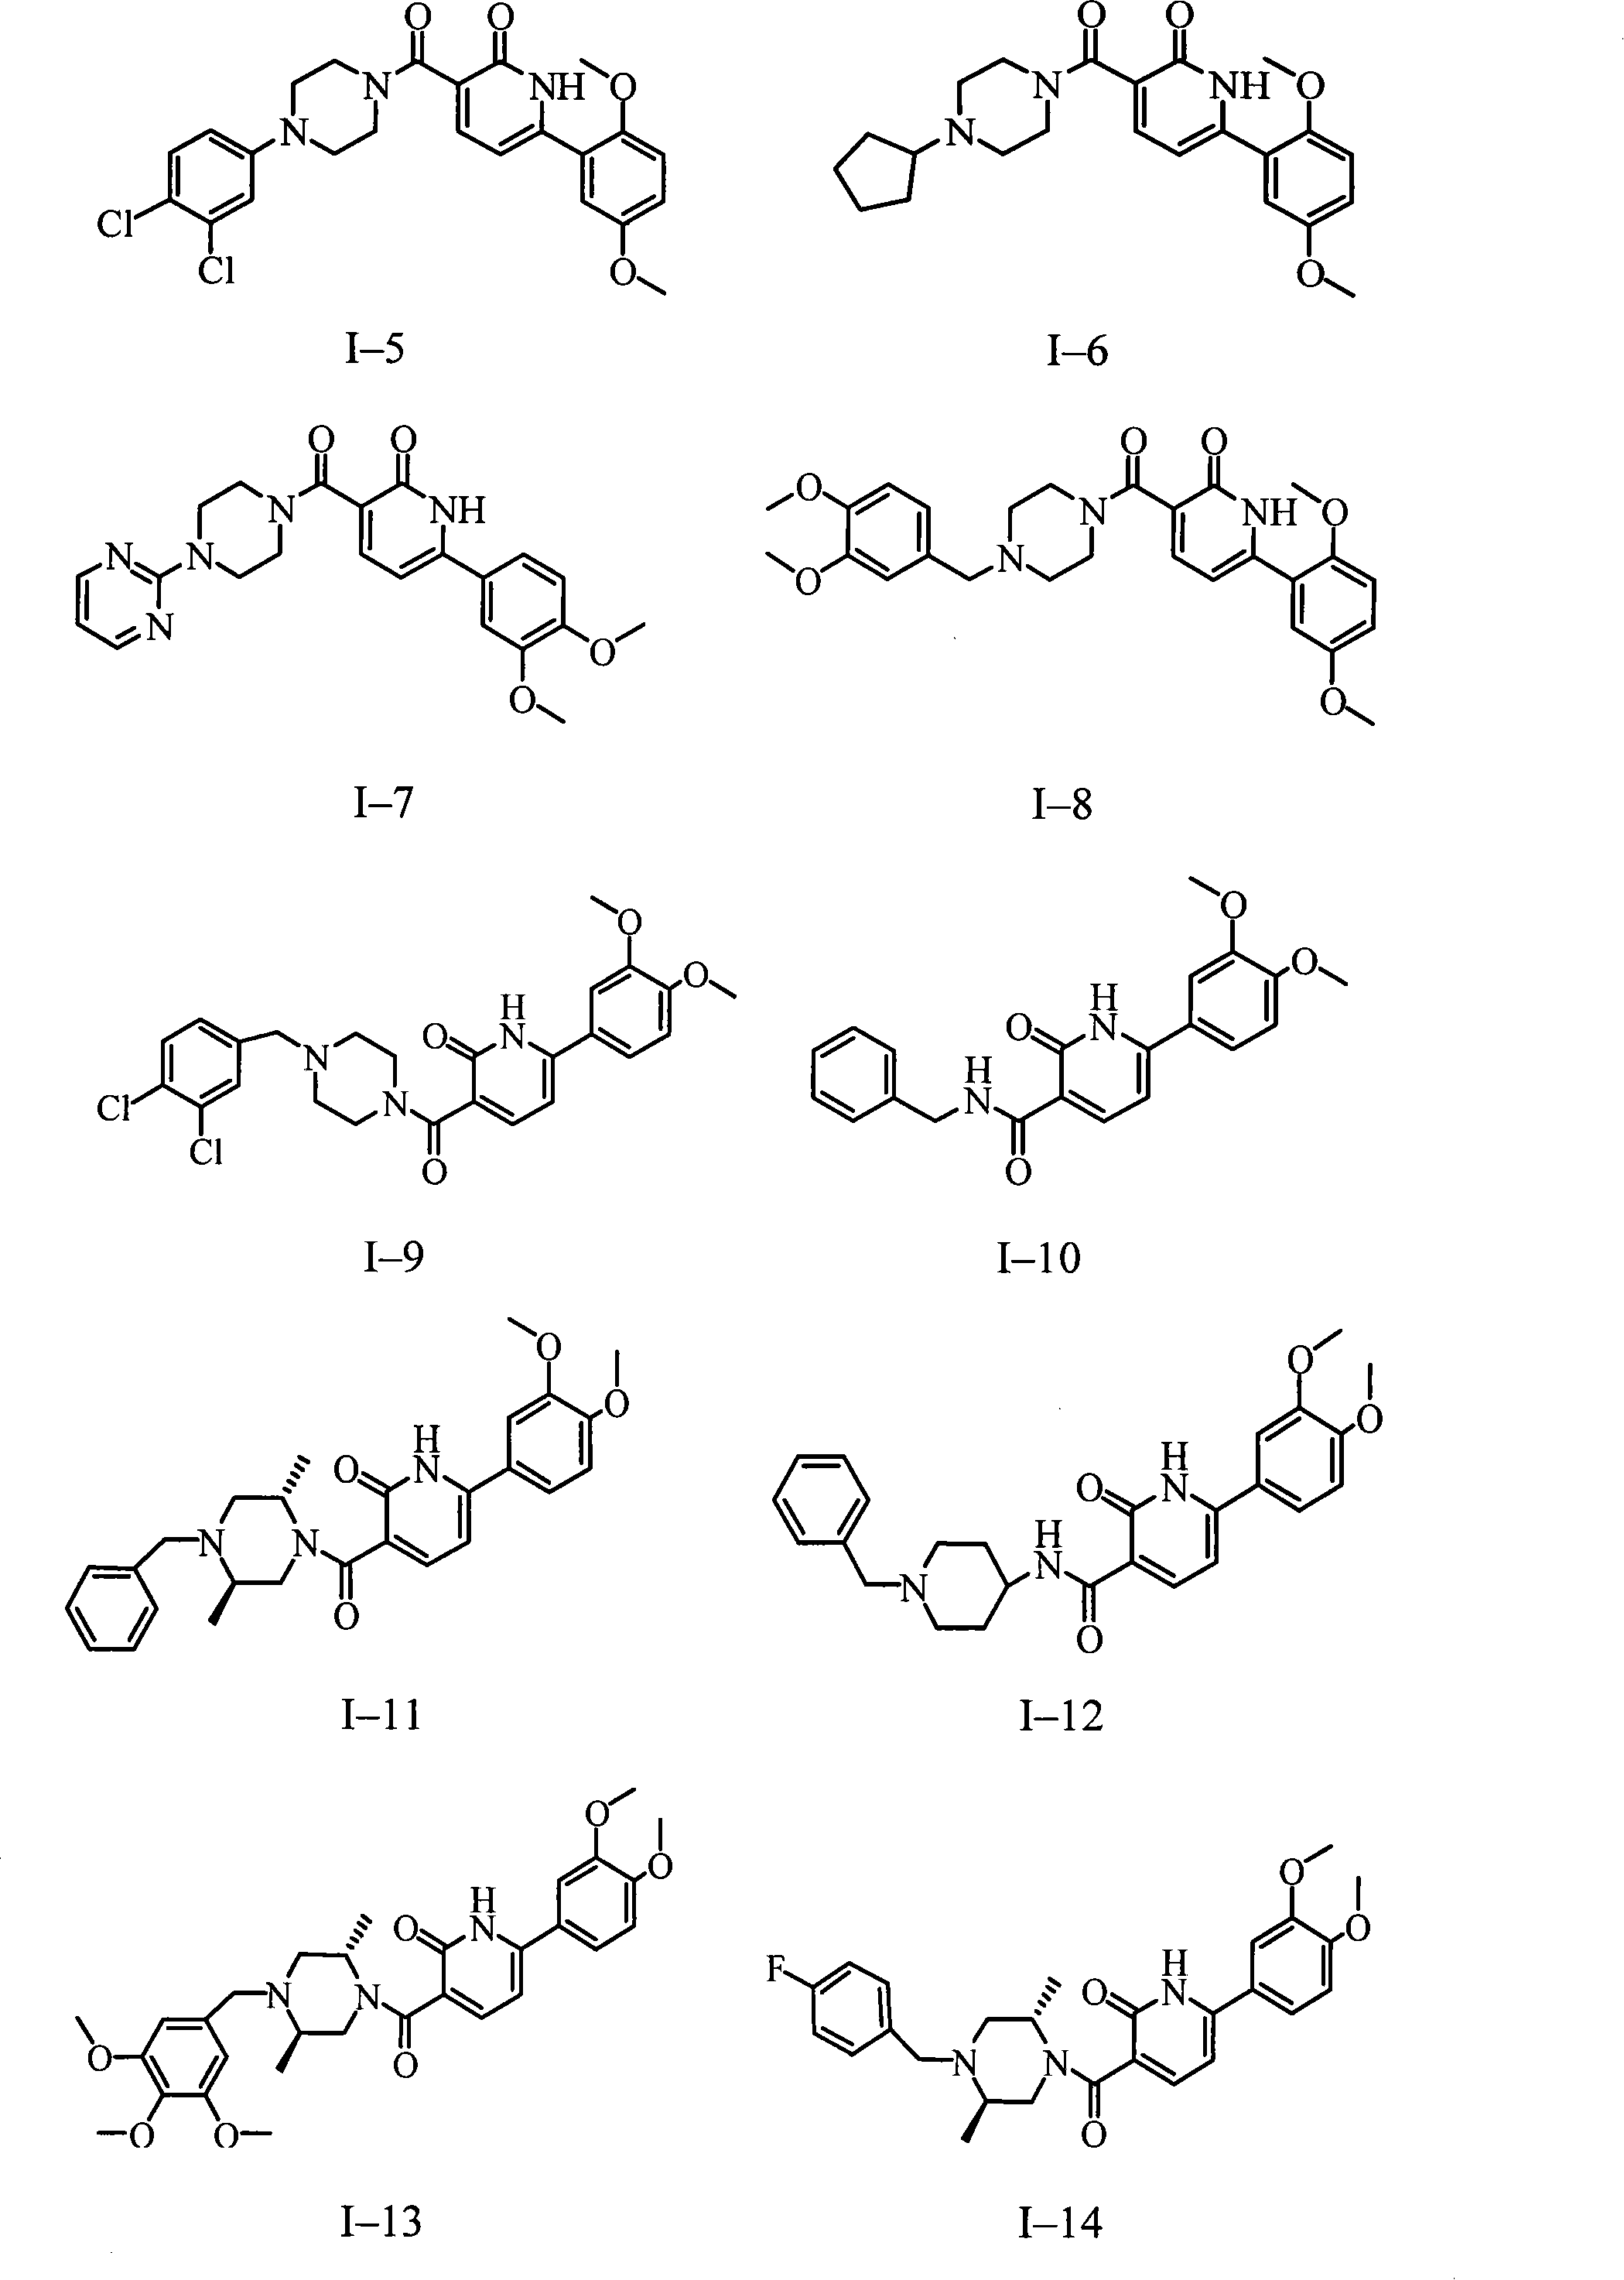 Use of aryl-3-substituted carbonyl pyridone compound